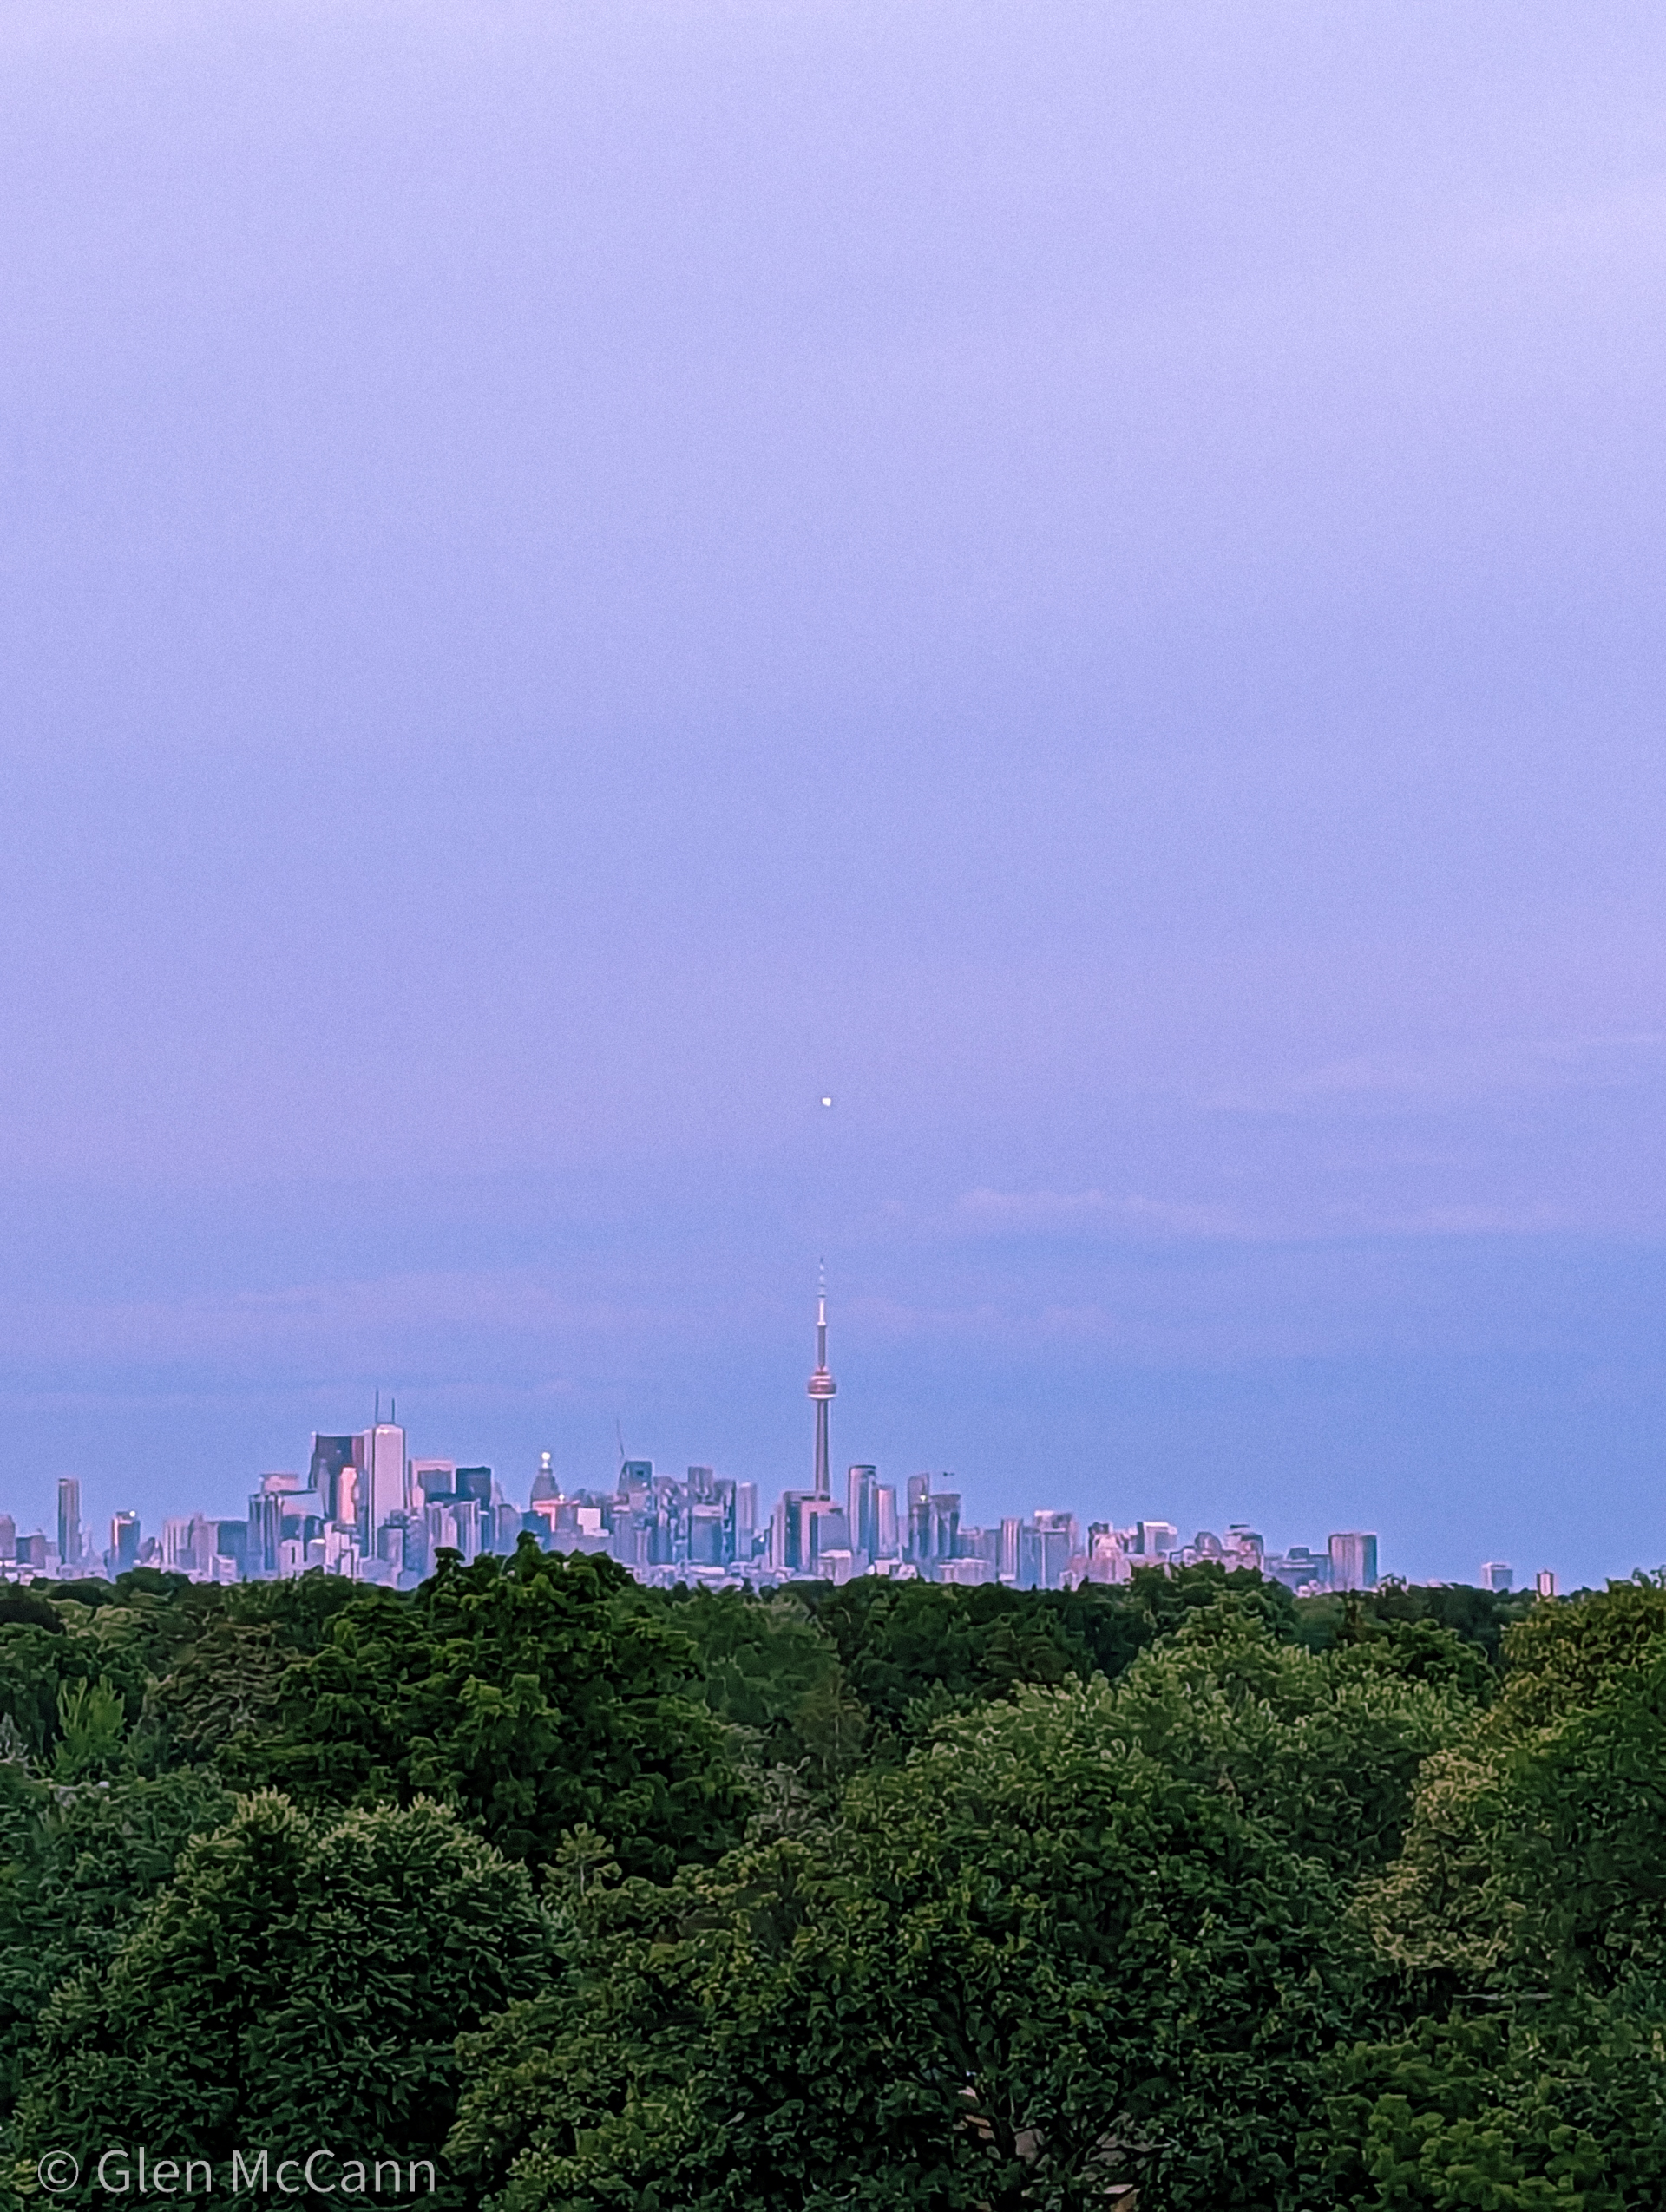 Skyline photo of Toronto featuring trees in the foreground and the CN tower in the background, position to be pointing directly up at the moon.